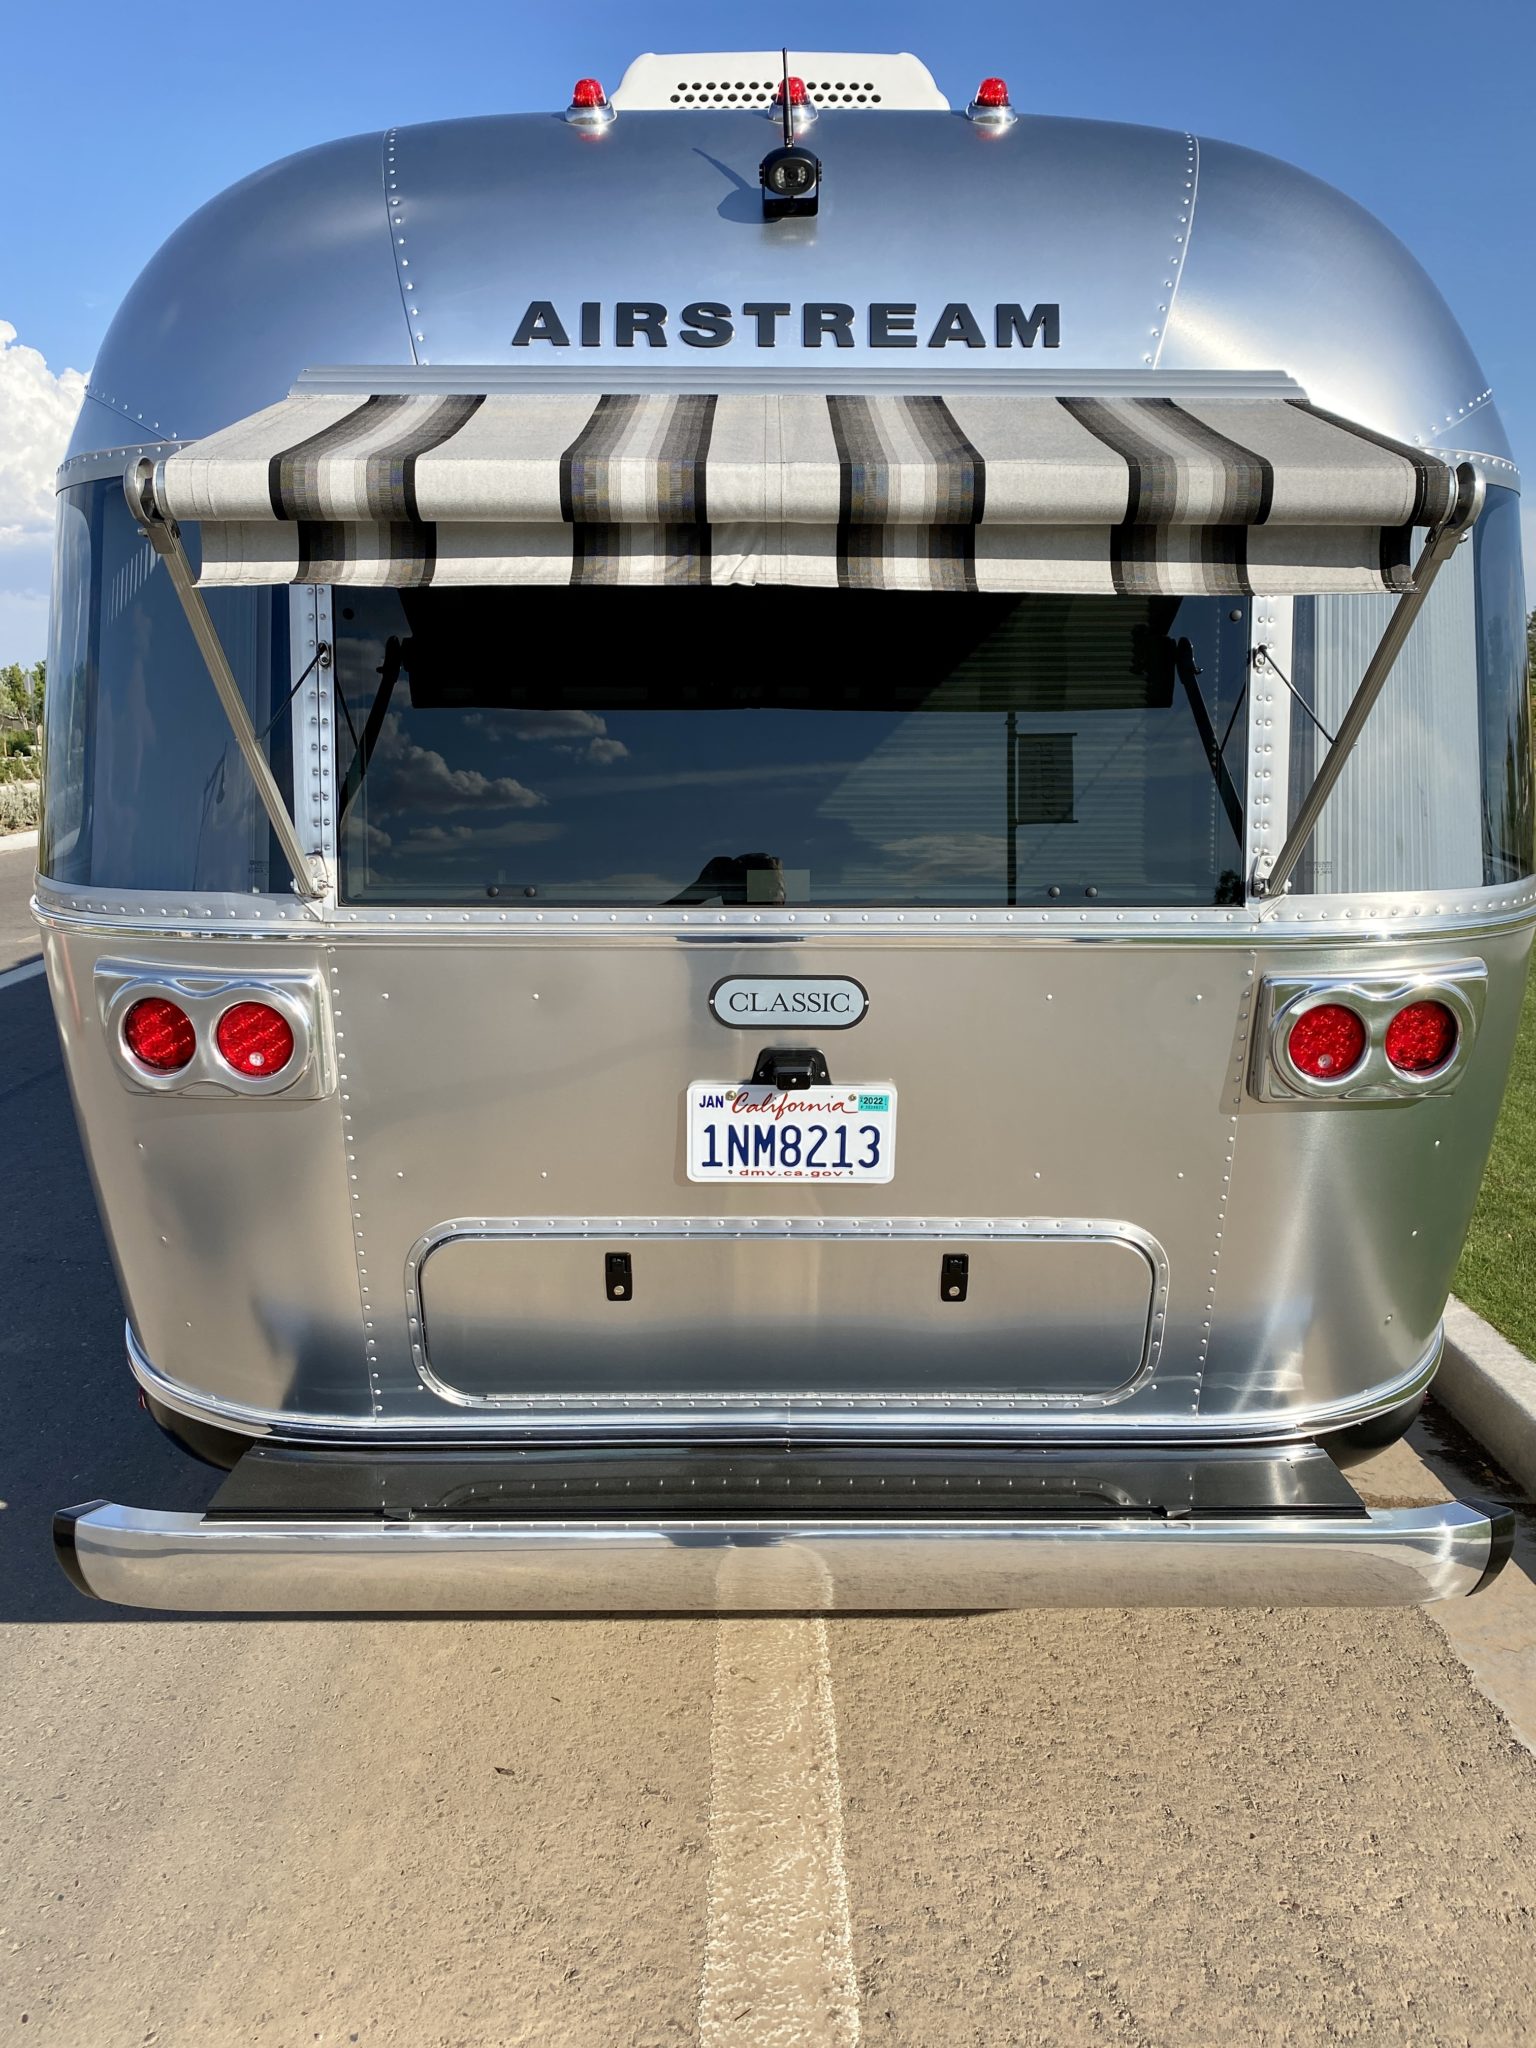 2021 Airstream 30FT Classic For Sale in Surprise Airstream Marketplace